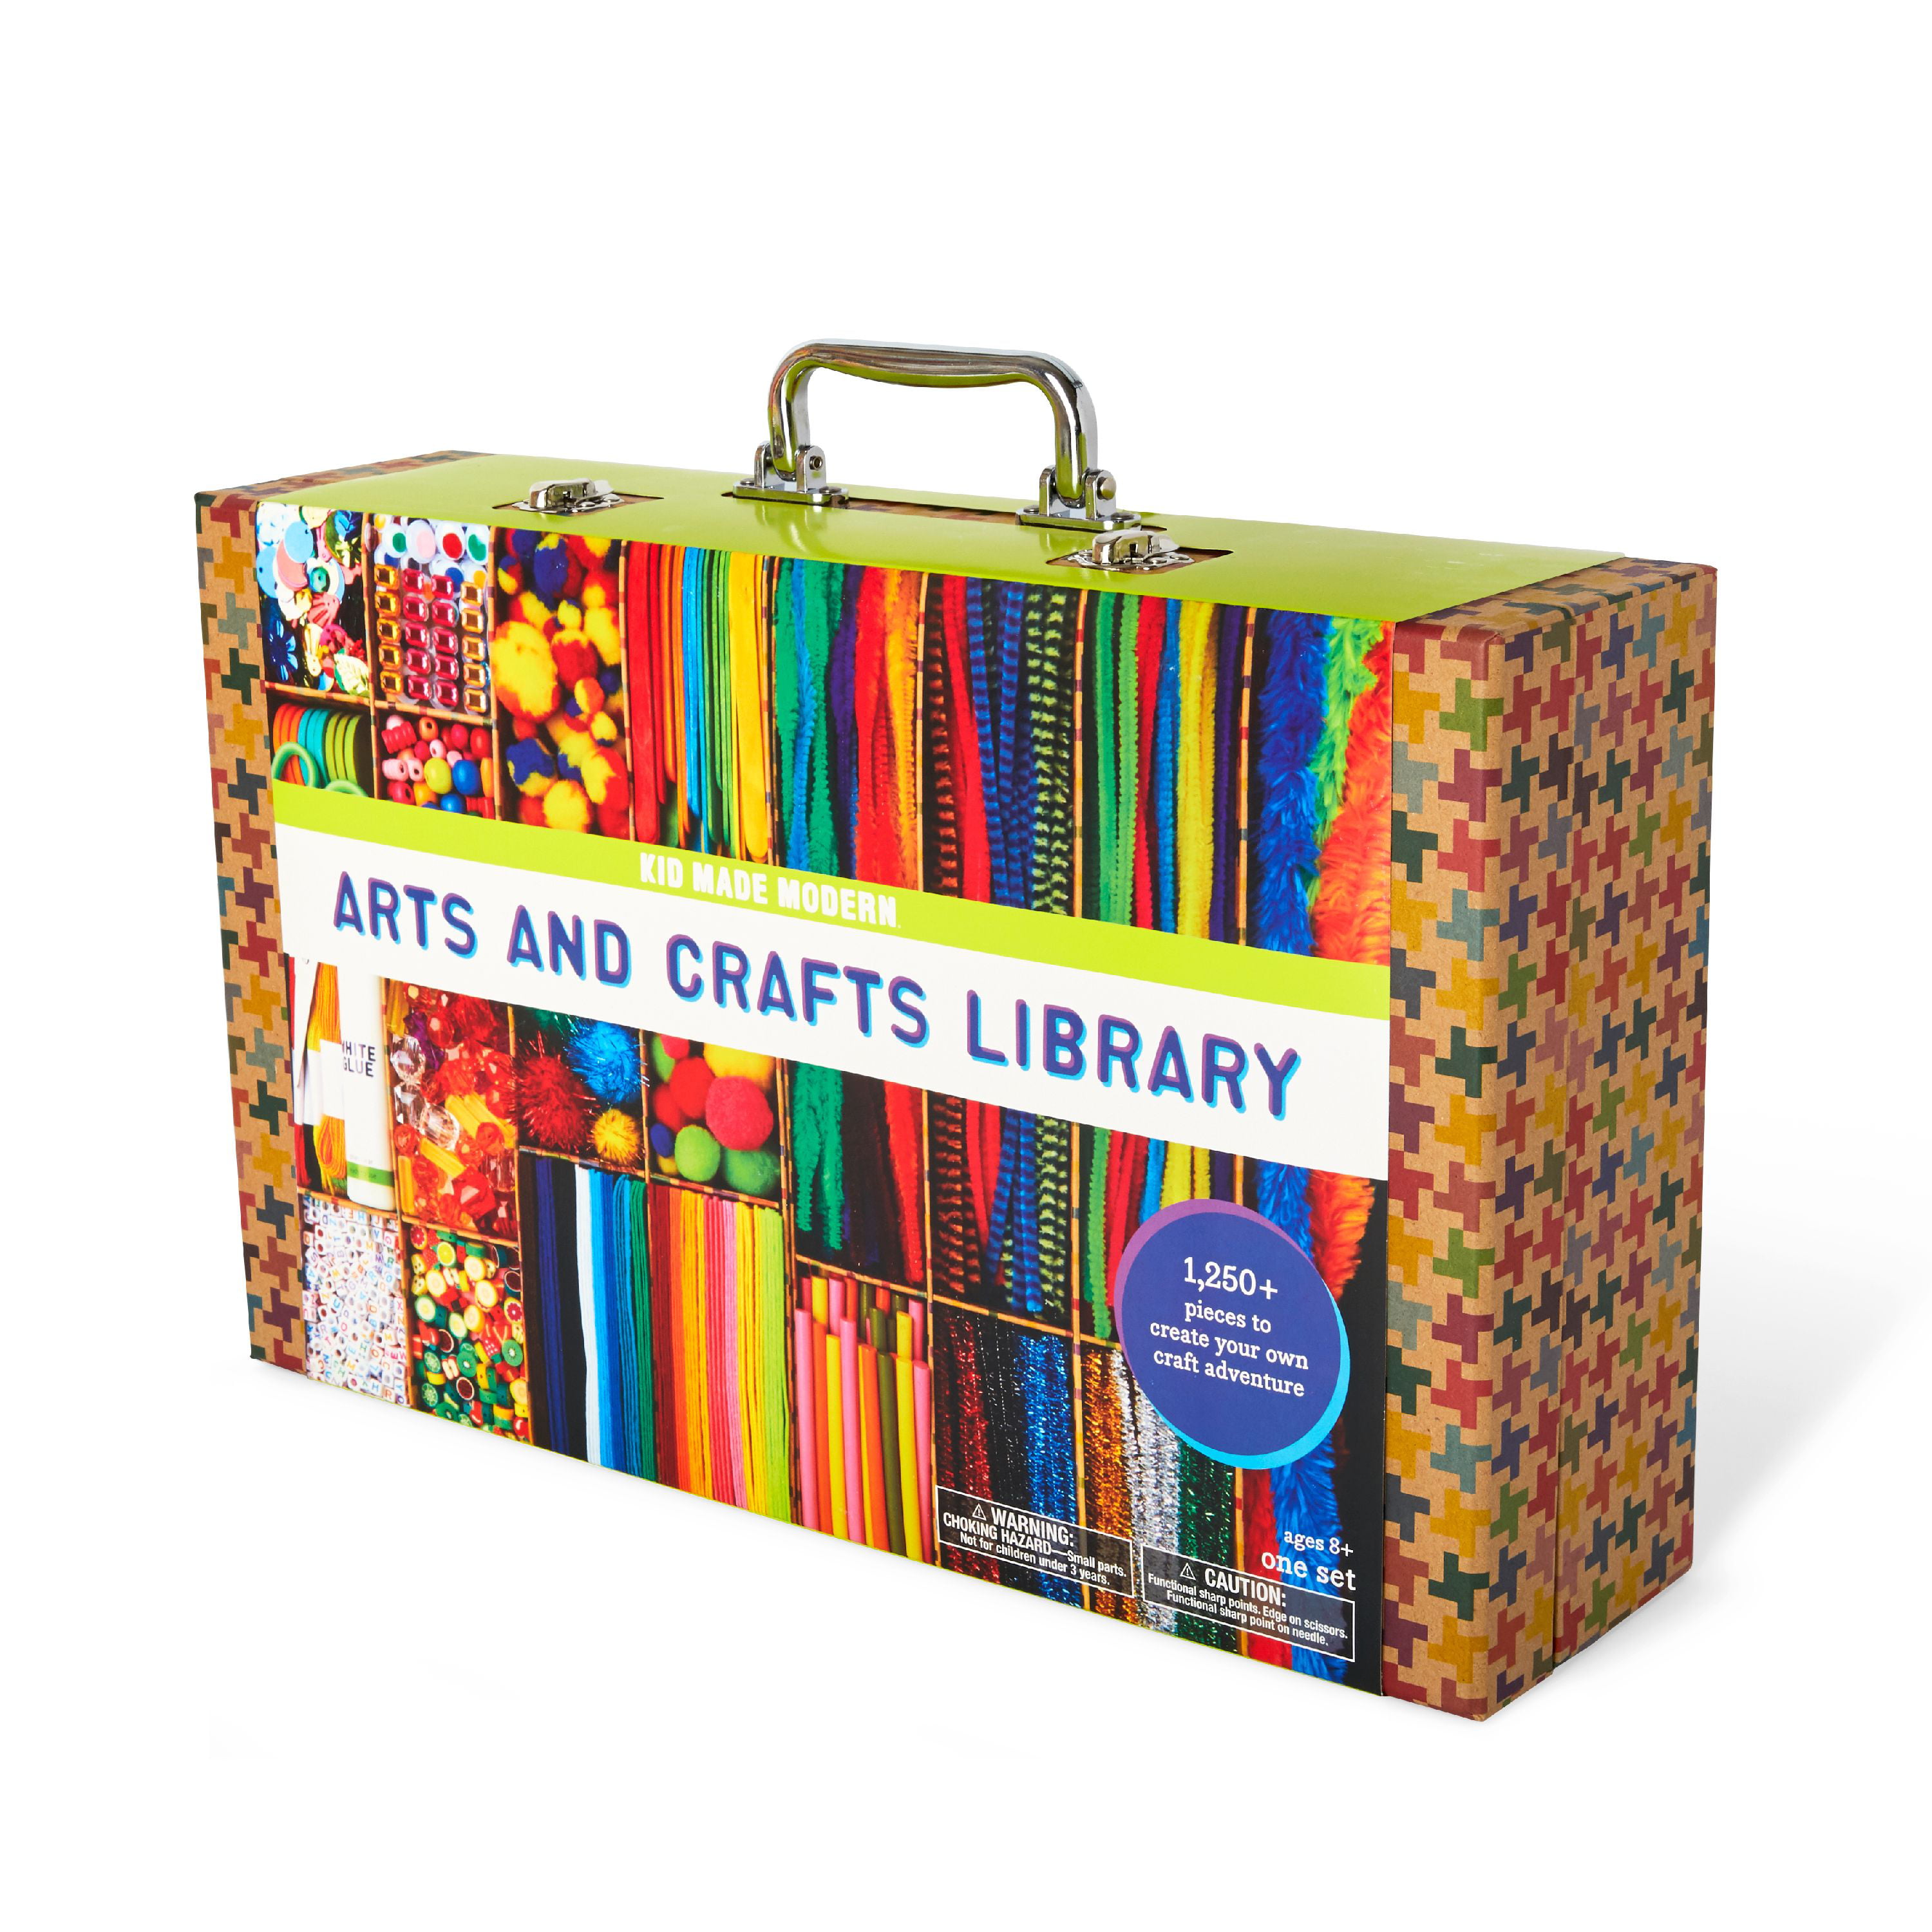 Kid Made Modern My First Arts & Craft Library Kit